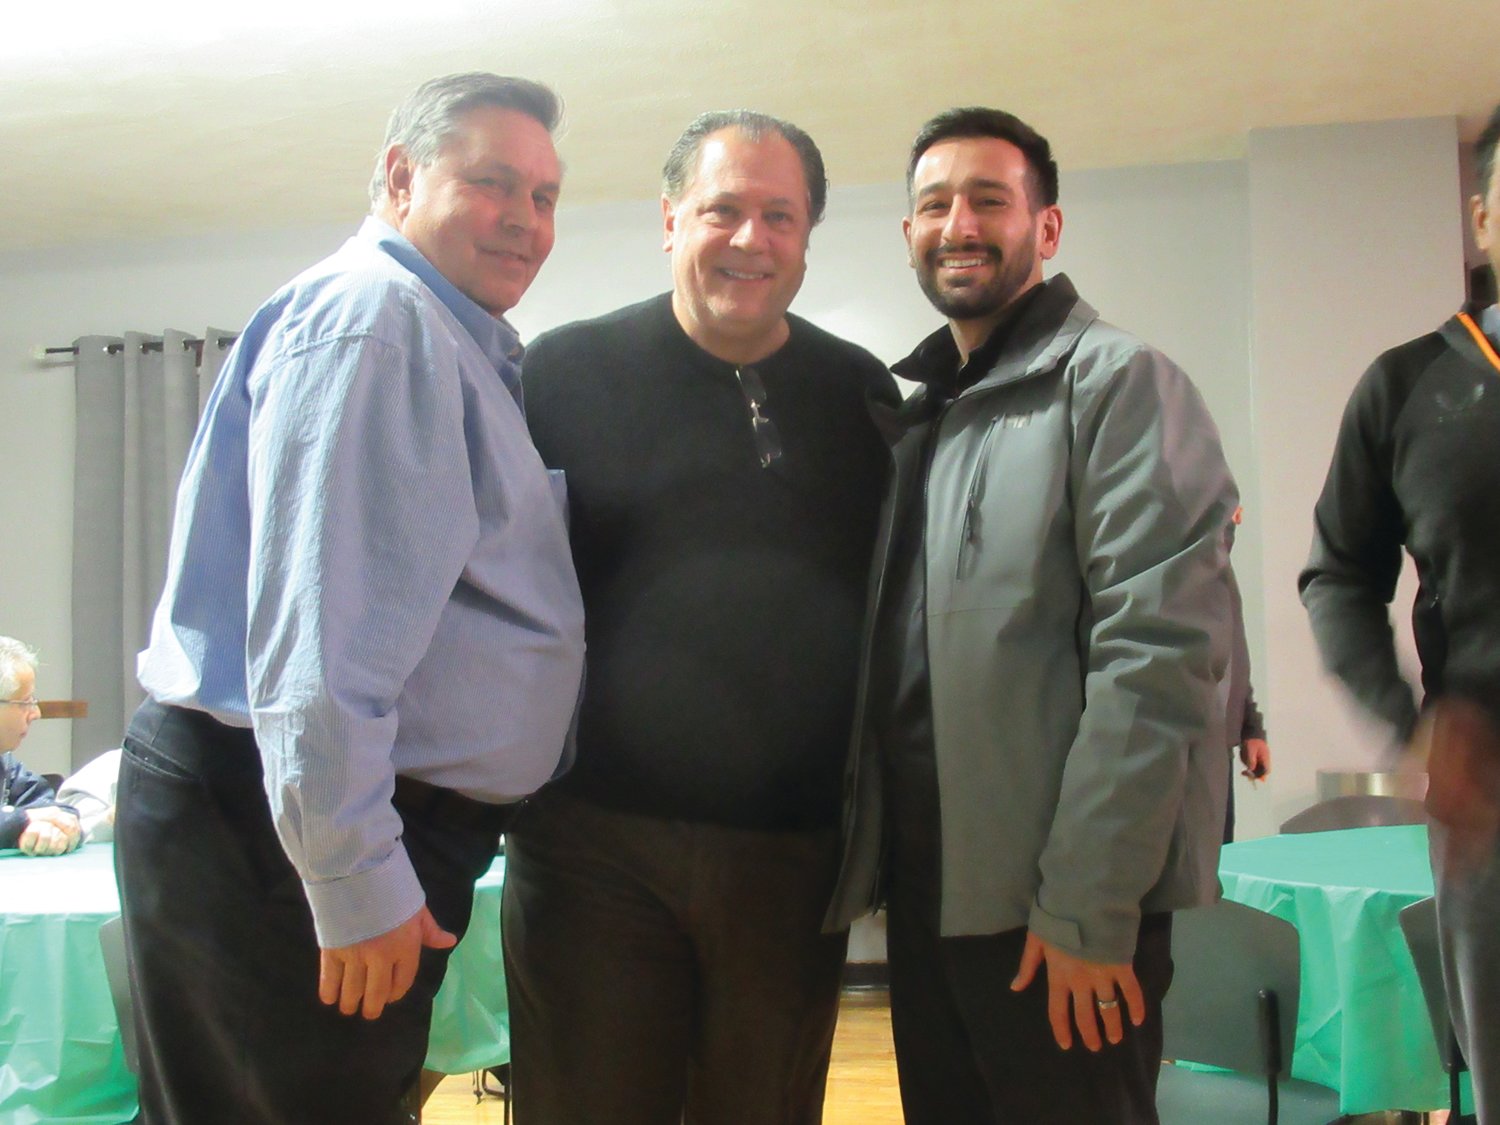 LINKED LEADERS: Johnston Mayor Joseph Polisena Jr. is joined by new JSC Executive Director Ricard DelFIno and new JDTC Chairman Joe Ballirano, who was unanimously elected to his new role.